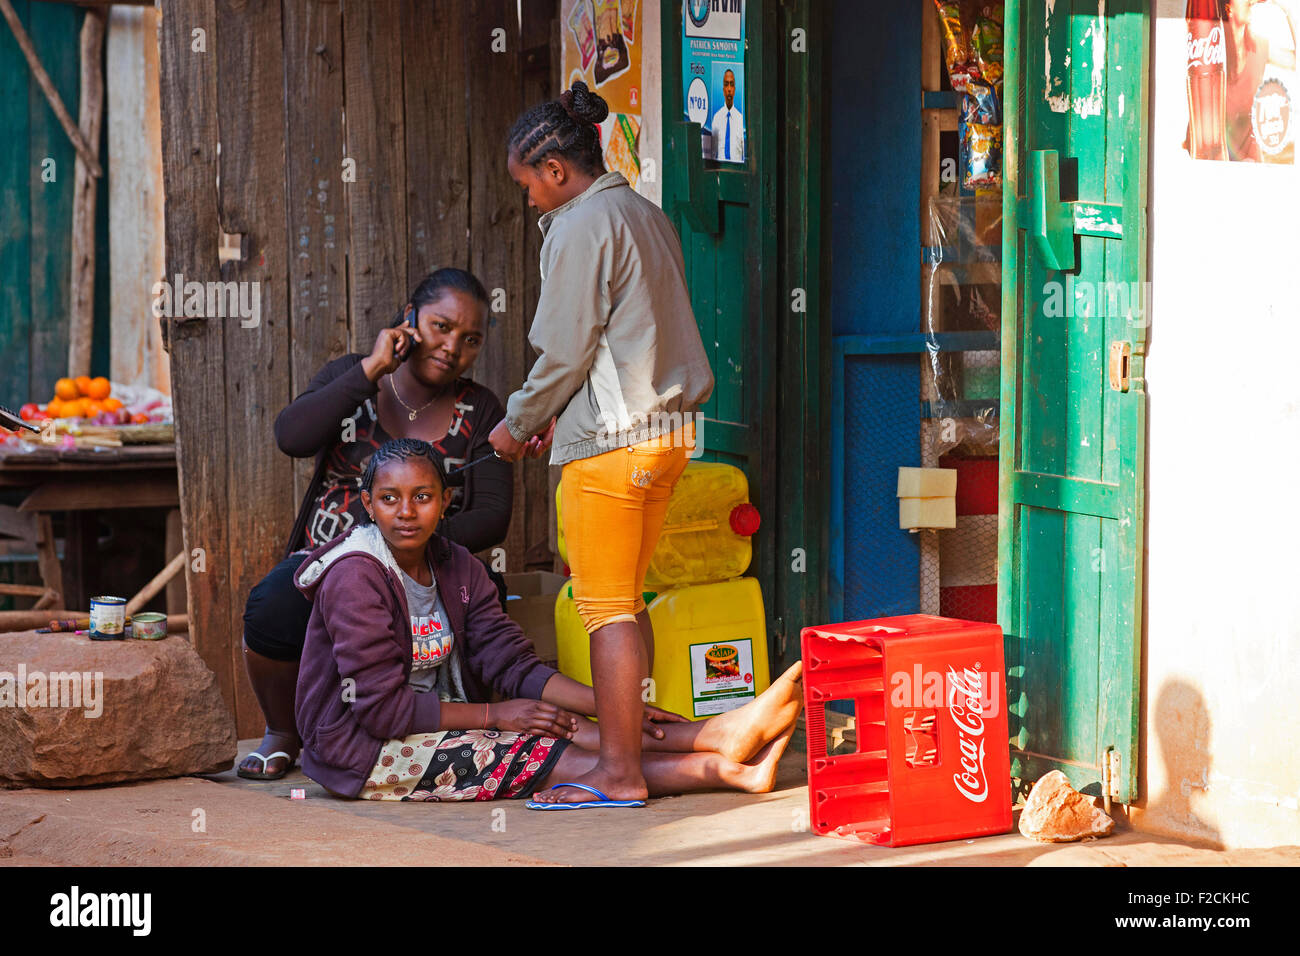 Malagasy woman on the phone and girls braiding each other's hair in front of shop in city Ambalavao, Haute Matsiatra, Madagascar Stock Photo